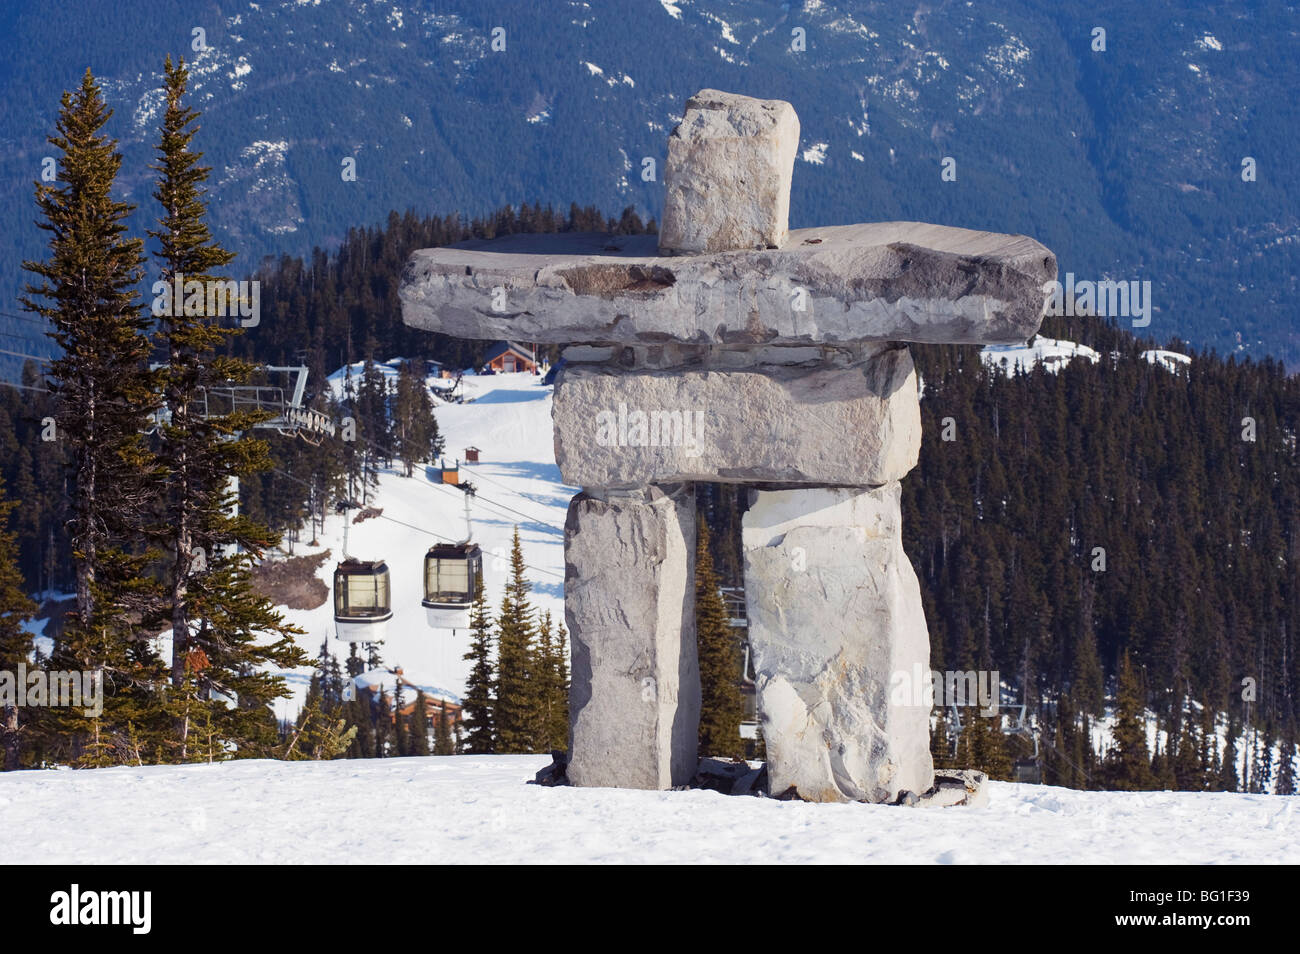 An Inuit Inukshuk stone statue, Whistler mountain resort, venue of the 2010 Winter Olympic Games, British Columbia, Canada Stock Photo